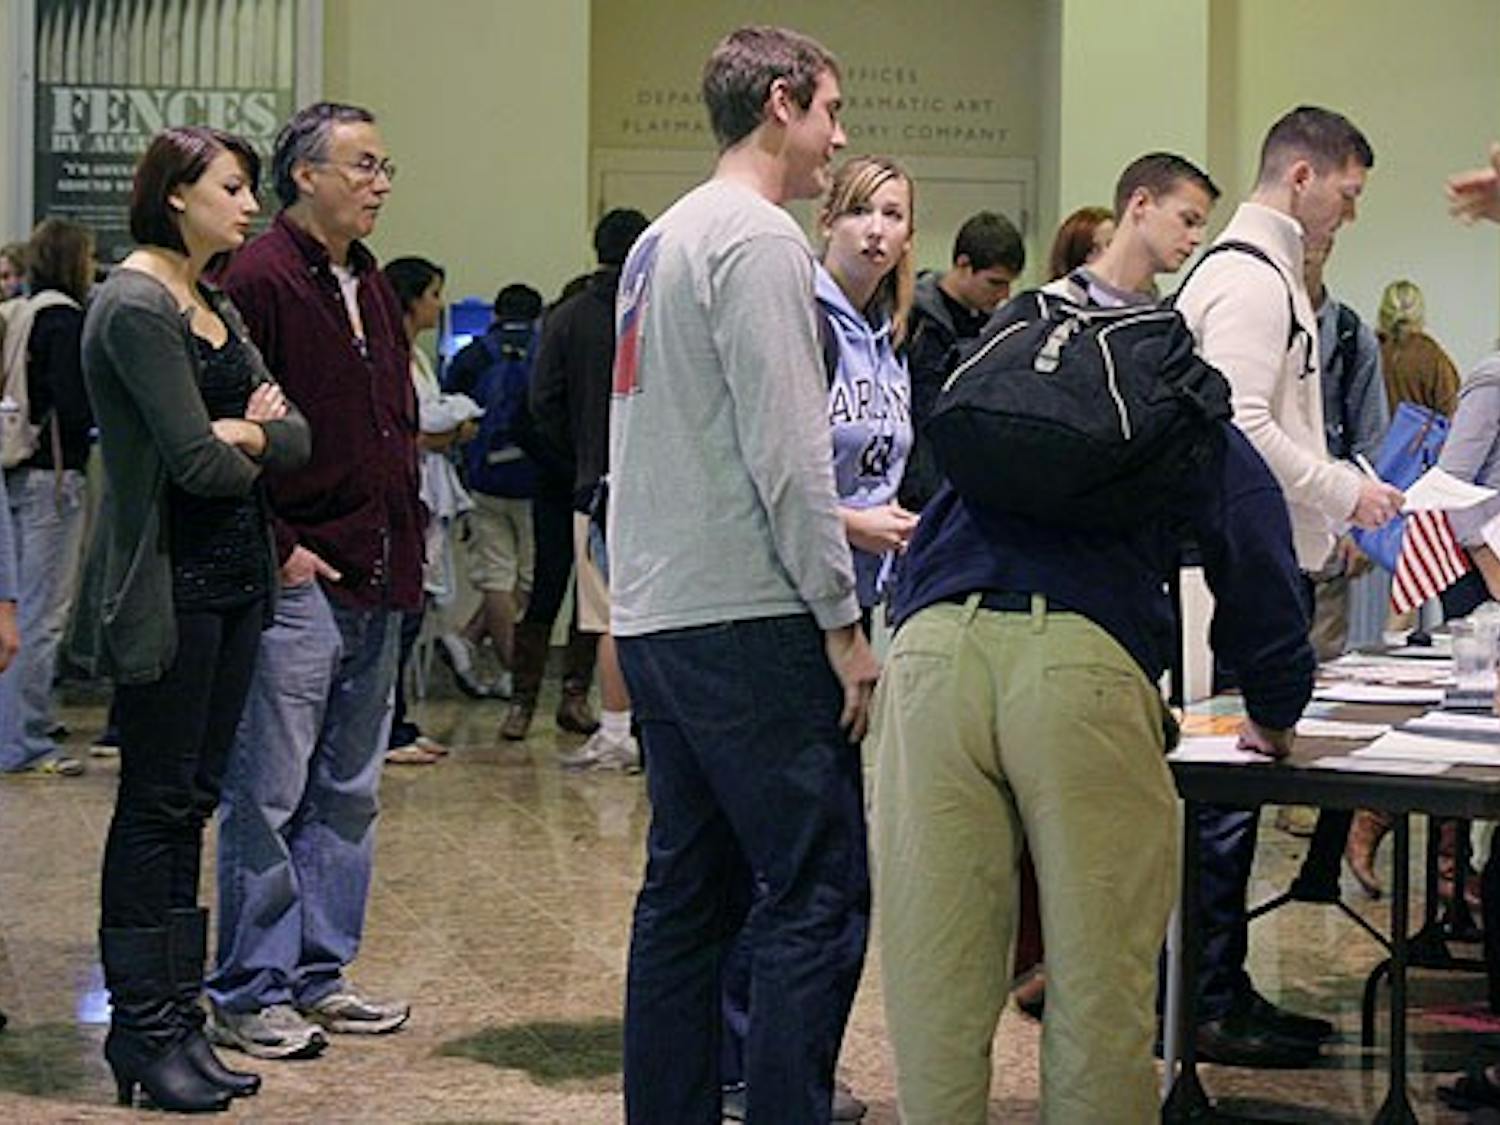 Though many students found the voting location confusing Tuesday, voting was actually taking place at the Center for Dramatic Art, not Morehead Planetarium. Once inside, the confusion continued as students had difficulty figuring out which line to stand in. 